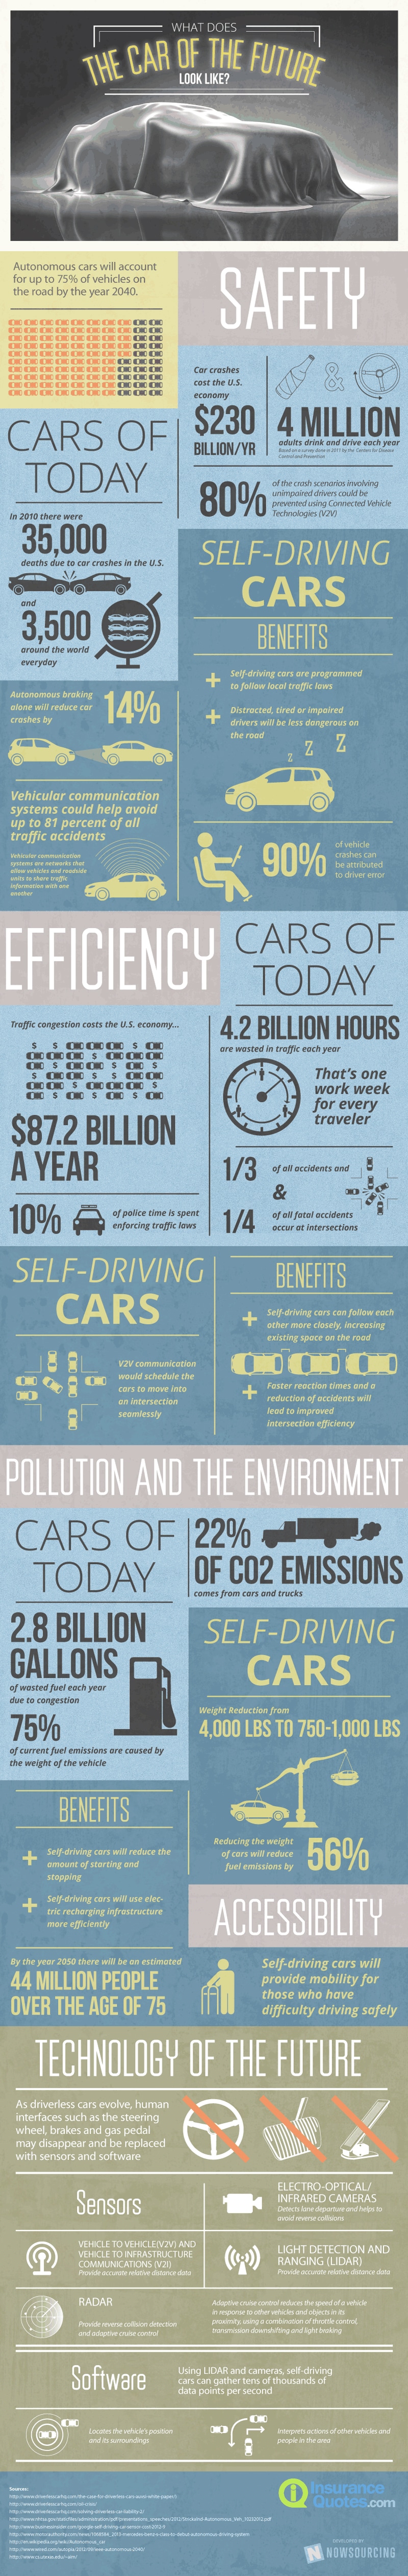 driverless-cars-of-future-infographic